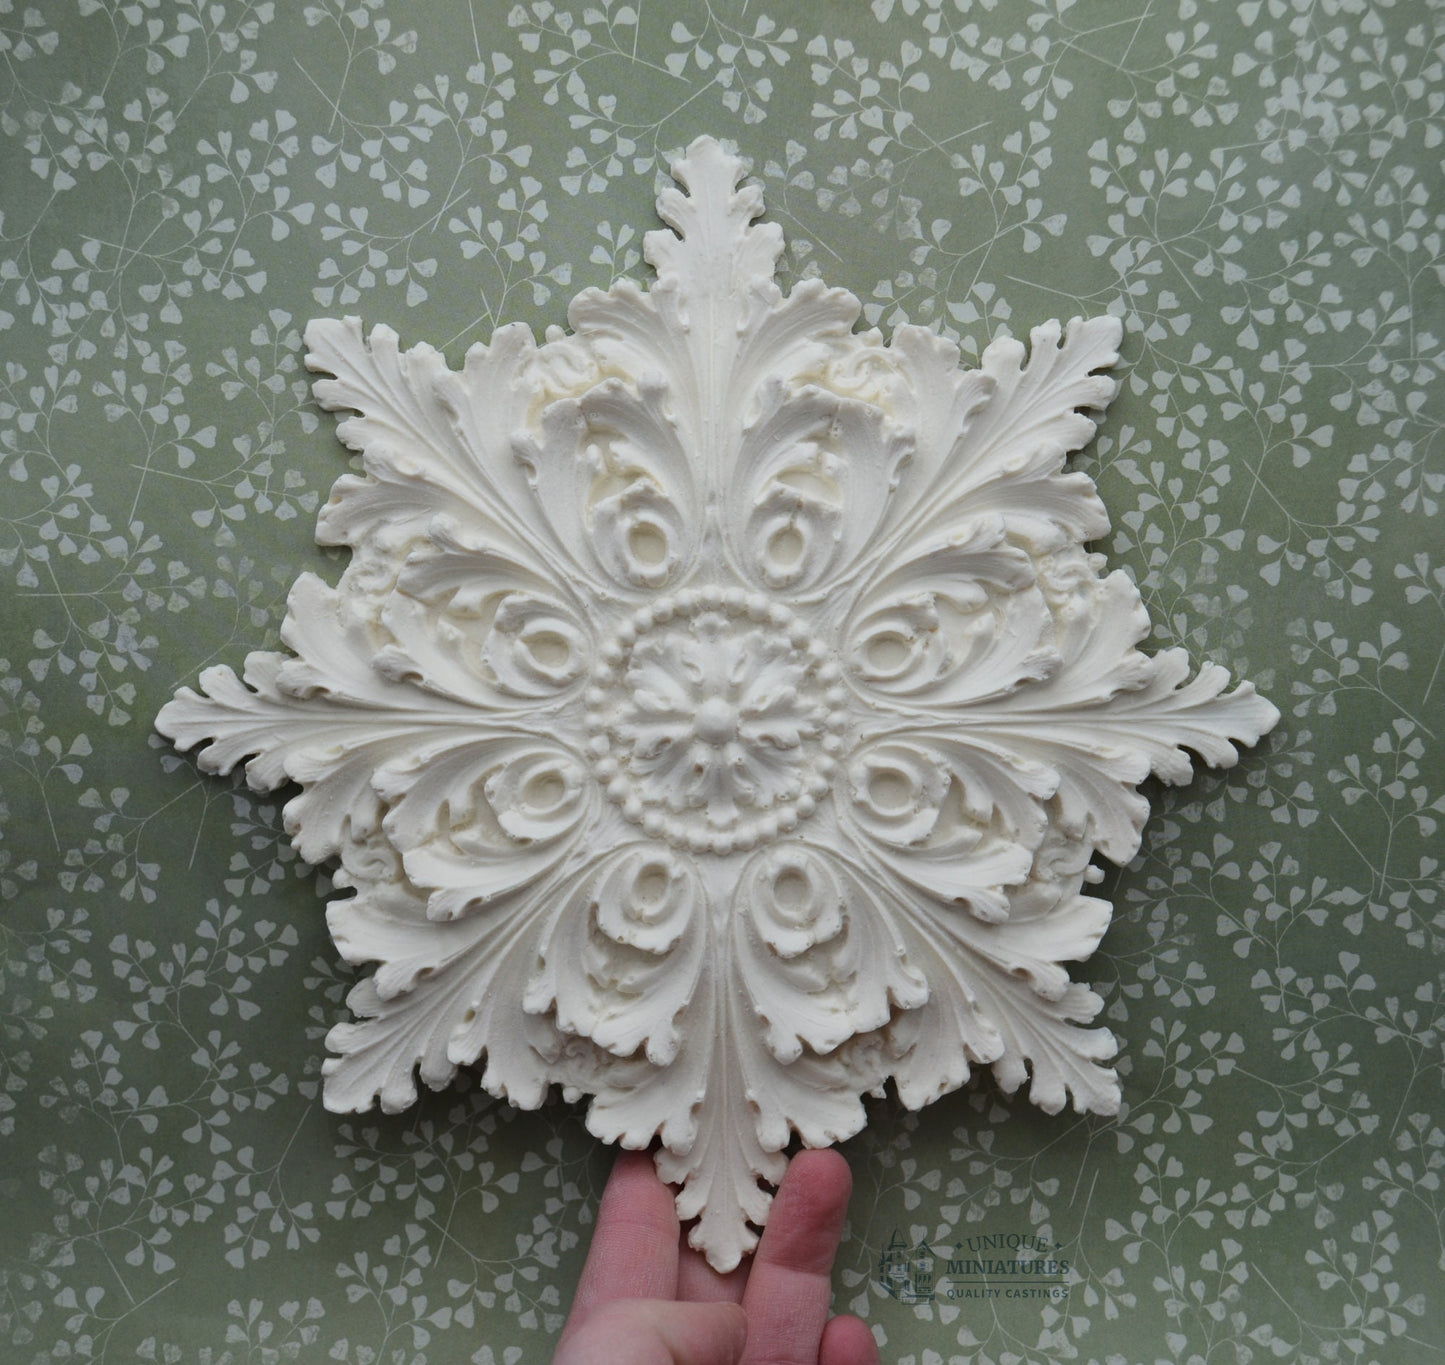 Large Radial Fern Medallion | Miniature Ceiling Carving